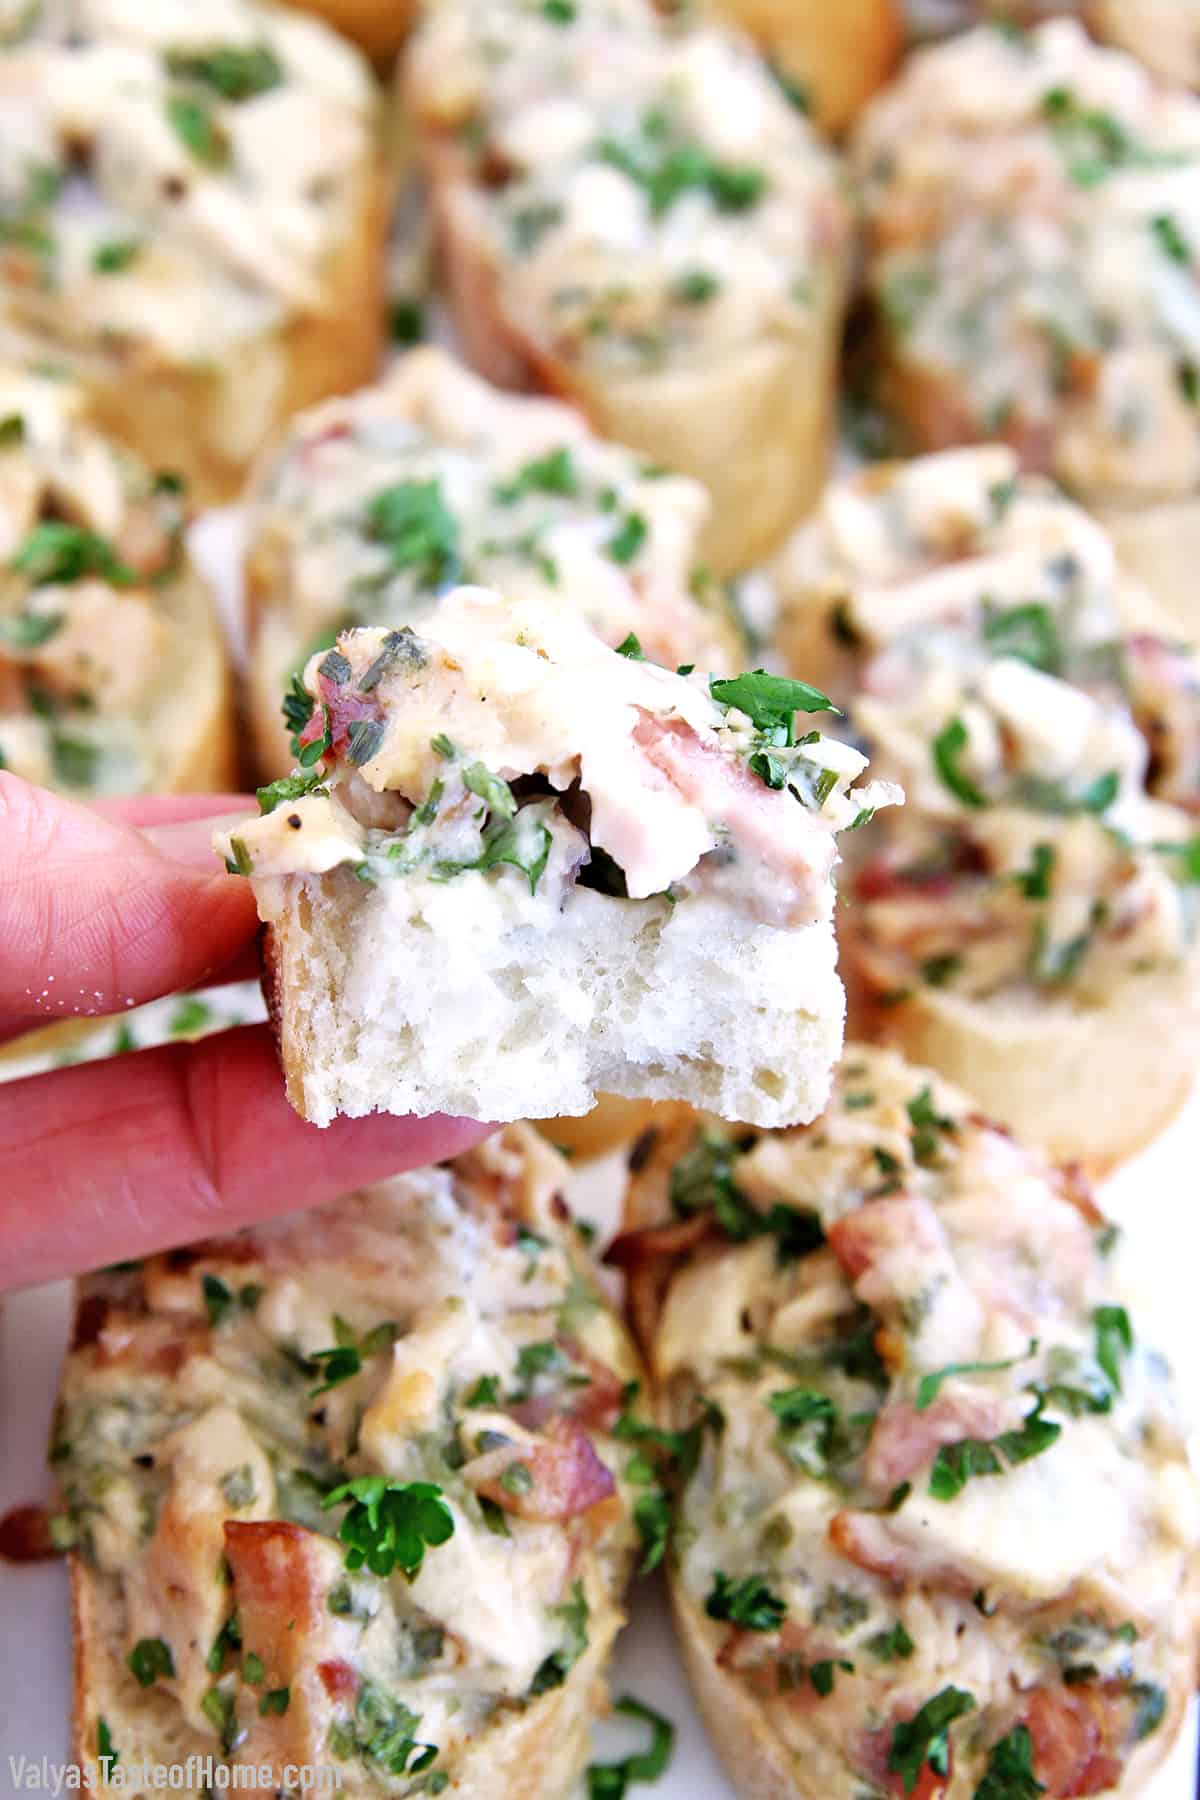 These Chicken Bacon Alfredo Canapés Appetizers are absolutely delicious served warm. These appetizers are so hearty and filling it also eats like a meal. You may turn it into a fantastic meal by adding a good homemade Caesar salad for an easy, light, and perfect lunch.